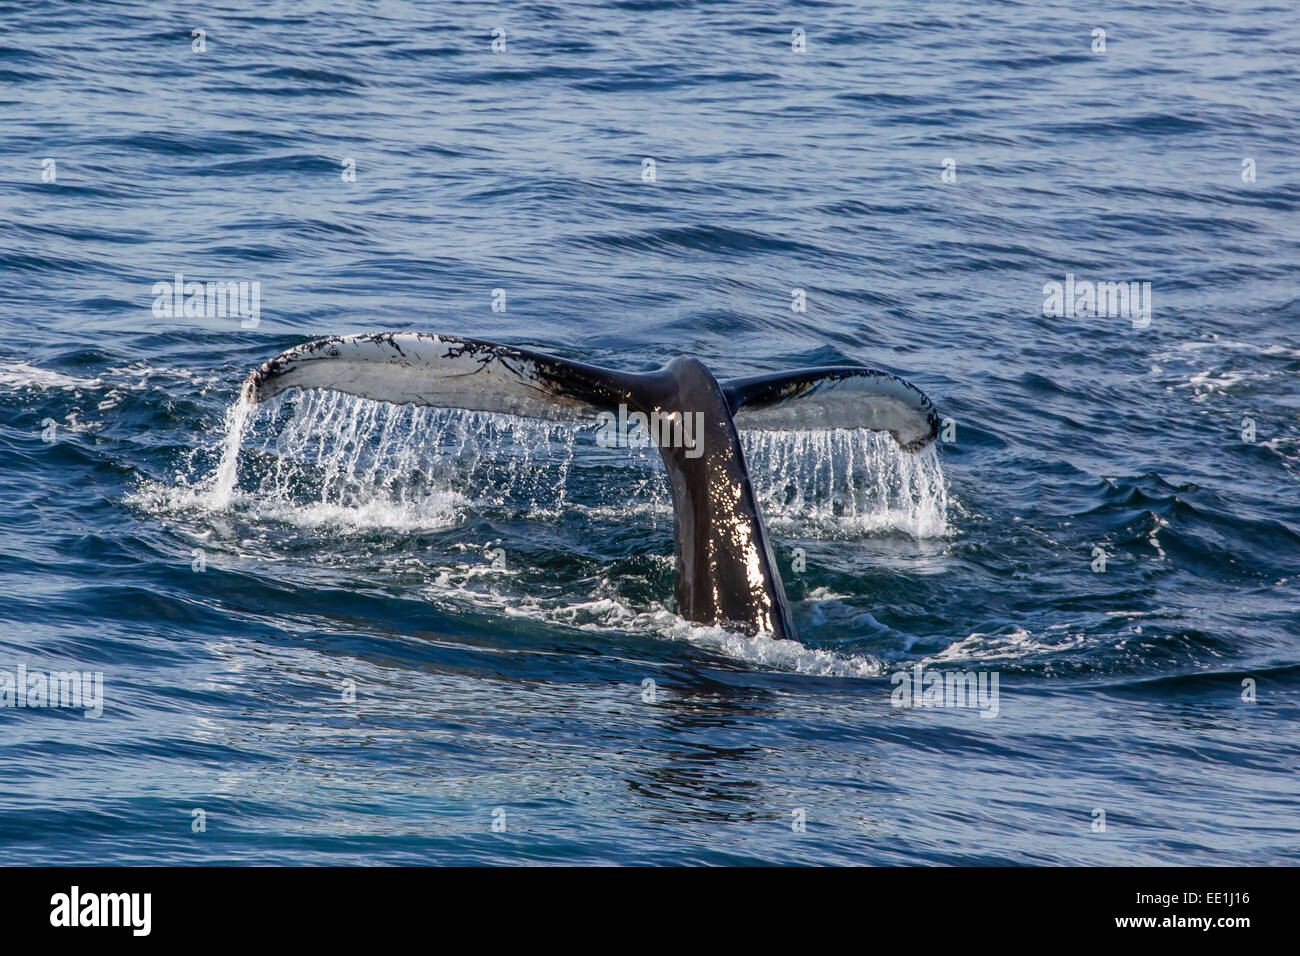 Adult humpback whale (Megaptera novaeangliae) flukes-up dive off the west coast of Spitsbergen, Svalbard, Arctic, Norway Stock Photo